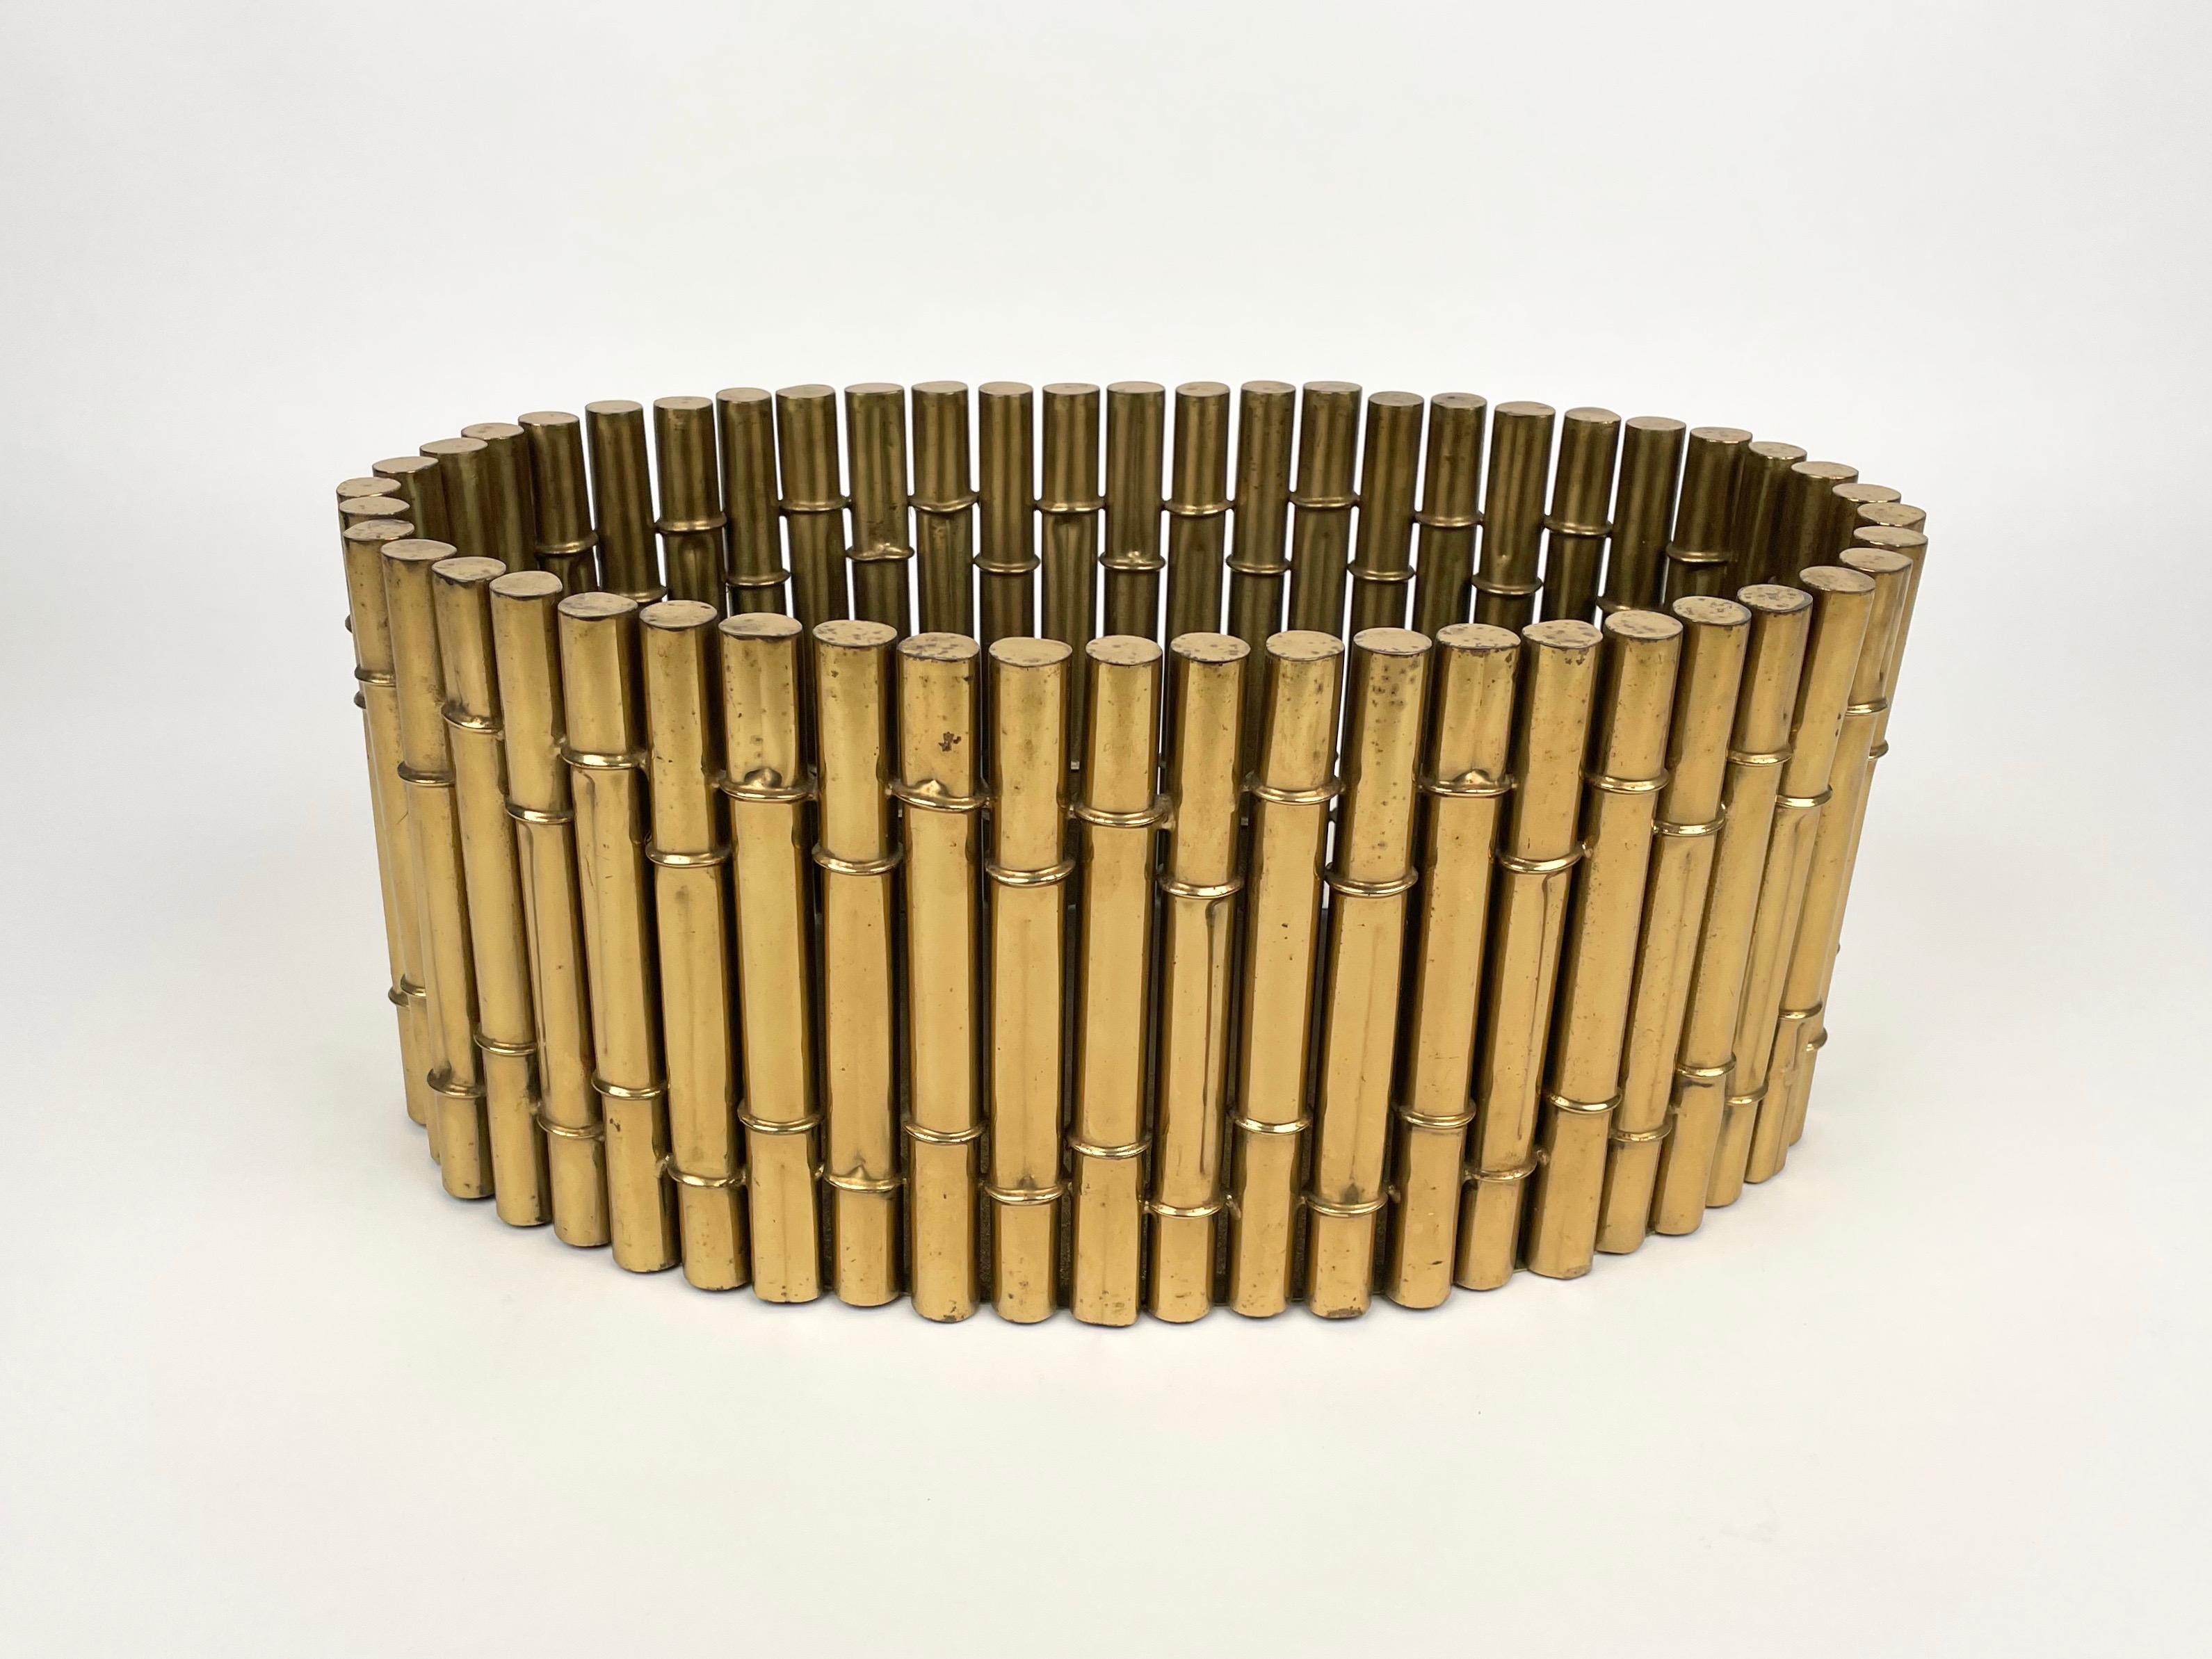 Oval brass faux bamboo magazine rack or basket by Bottega Garda, Italy, 1970s. 

On the bottom the signature is still engraved 